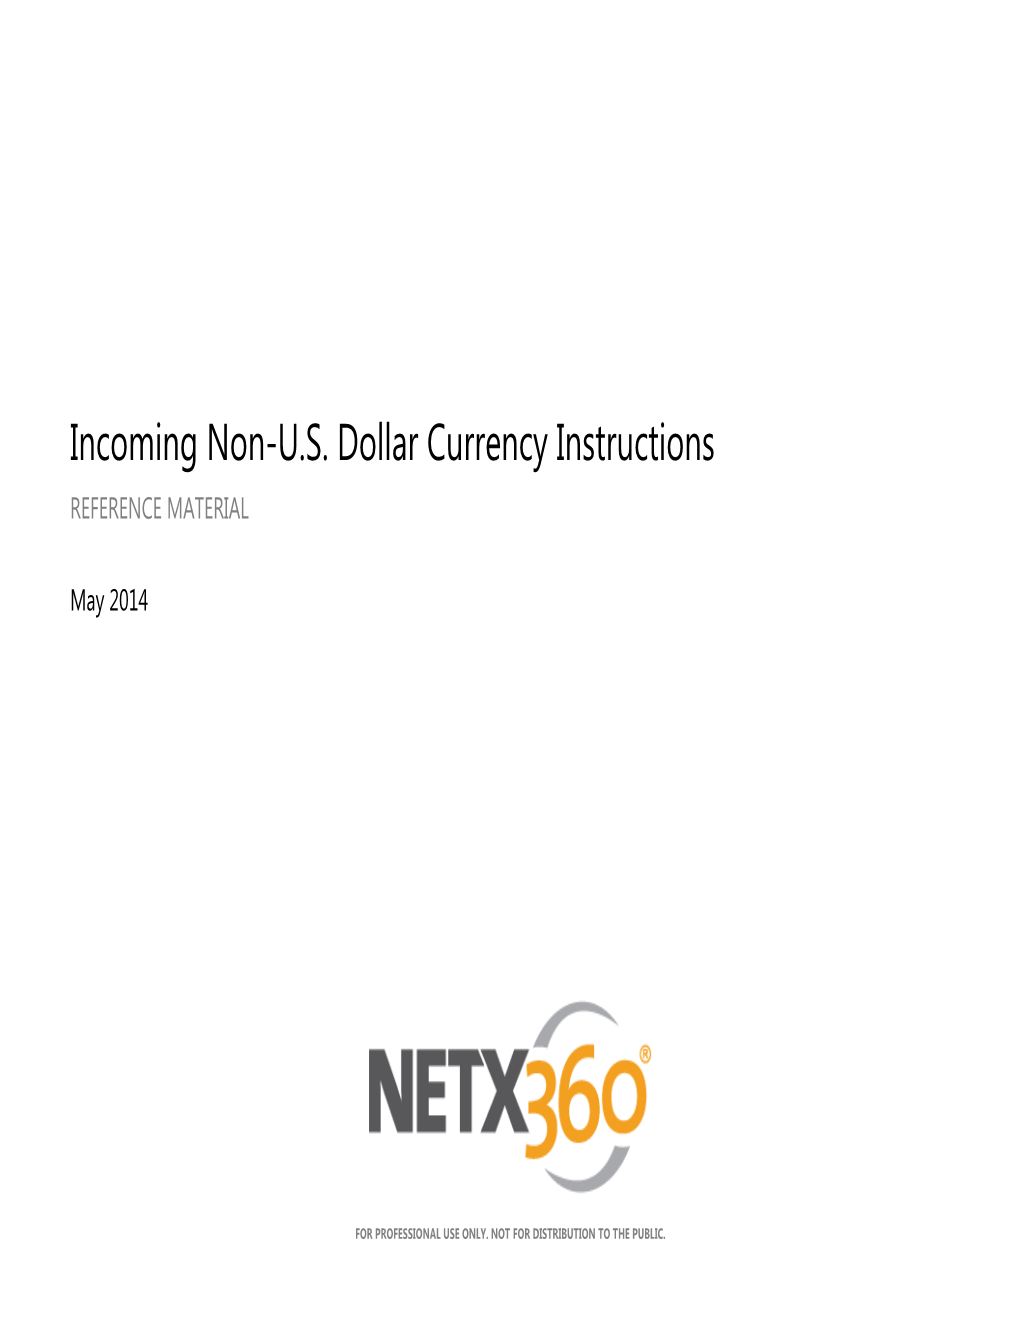 Incoming Non-U.S. Dollar Currency Instructions REFERENCE MATERIAL